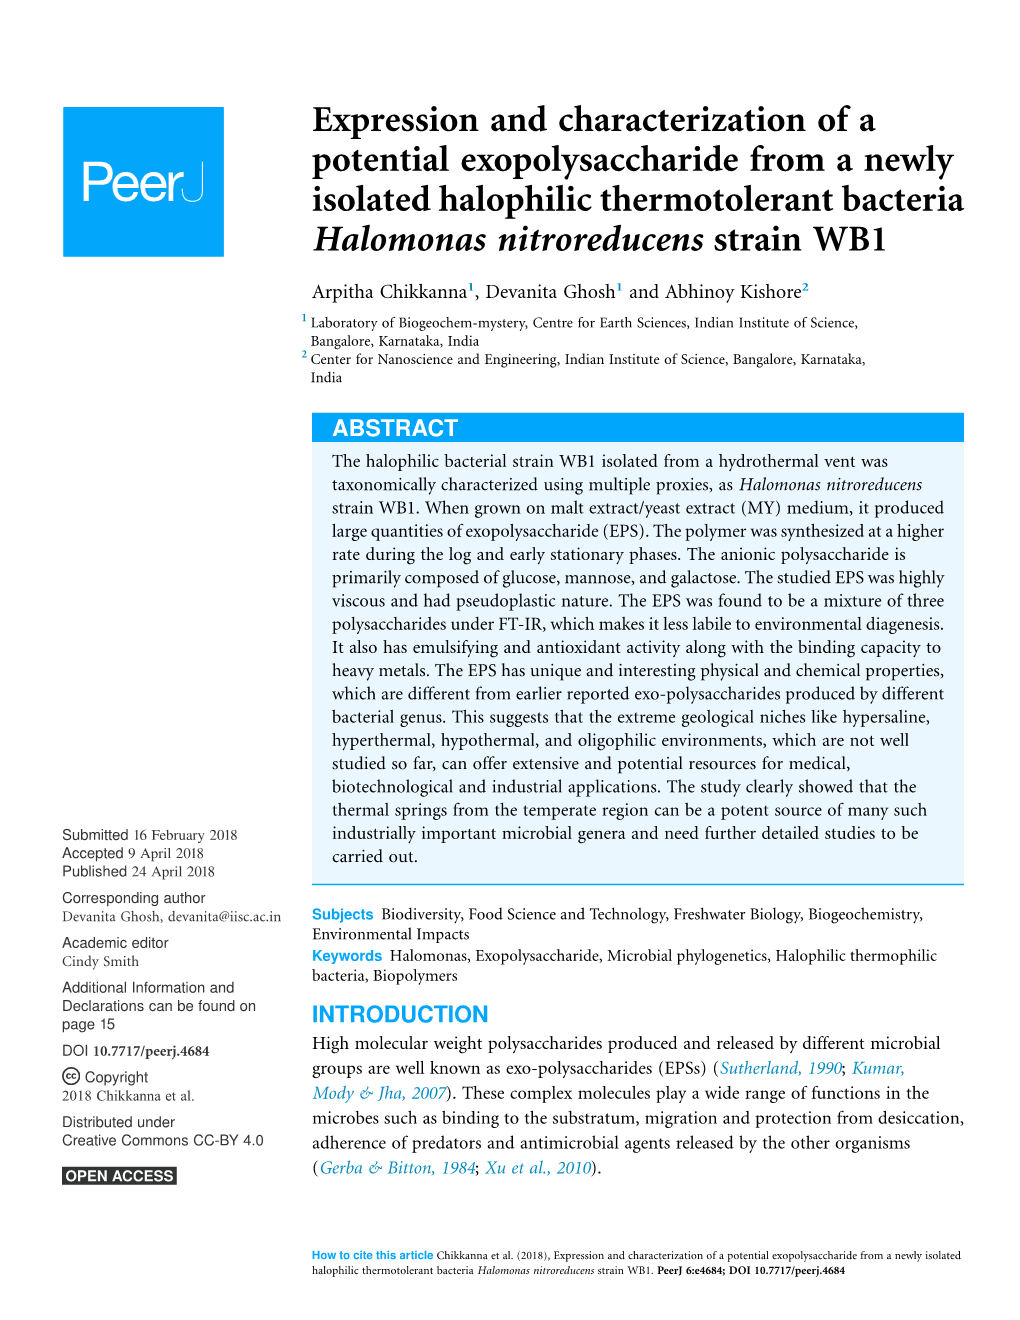 Expression and Characterization of a Potential Exopolysaccharide from a Newly Isolated Halophilic Thermotolerant Bacteria Halomonas Nitroreducens Strain WB1